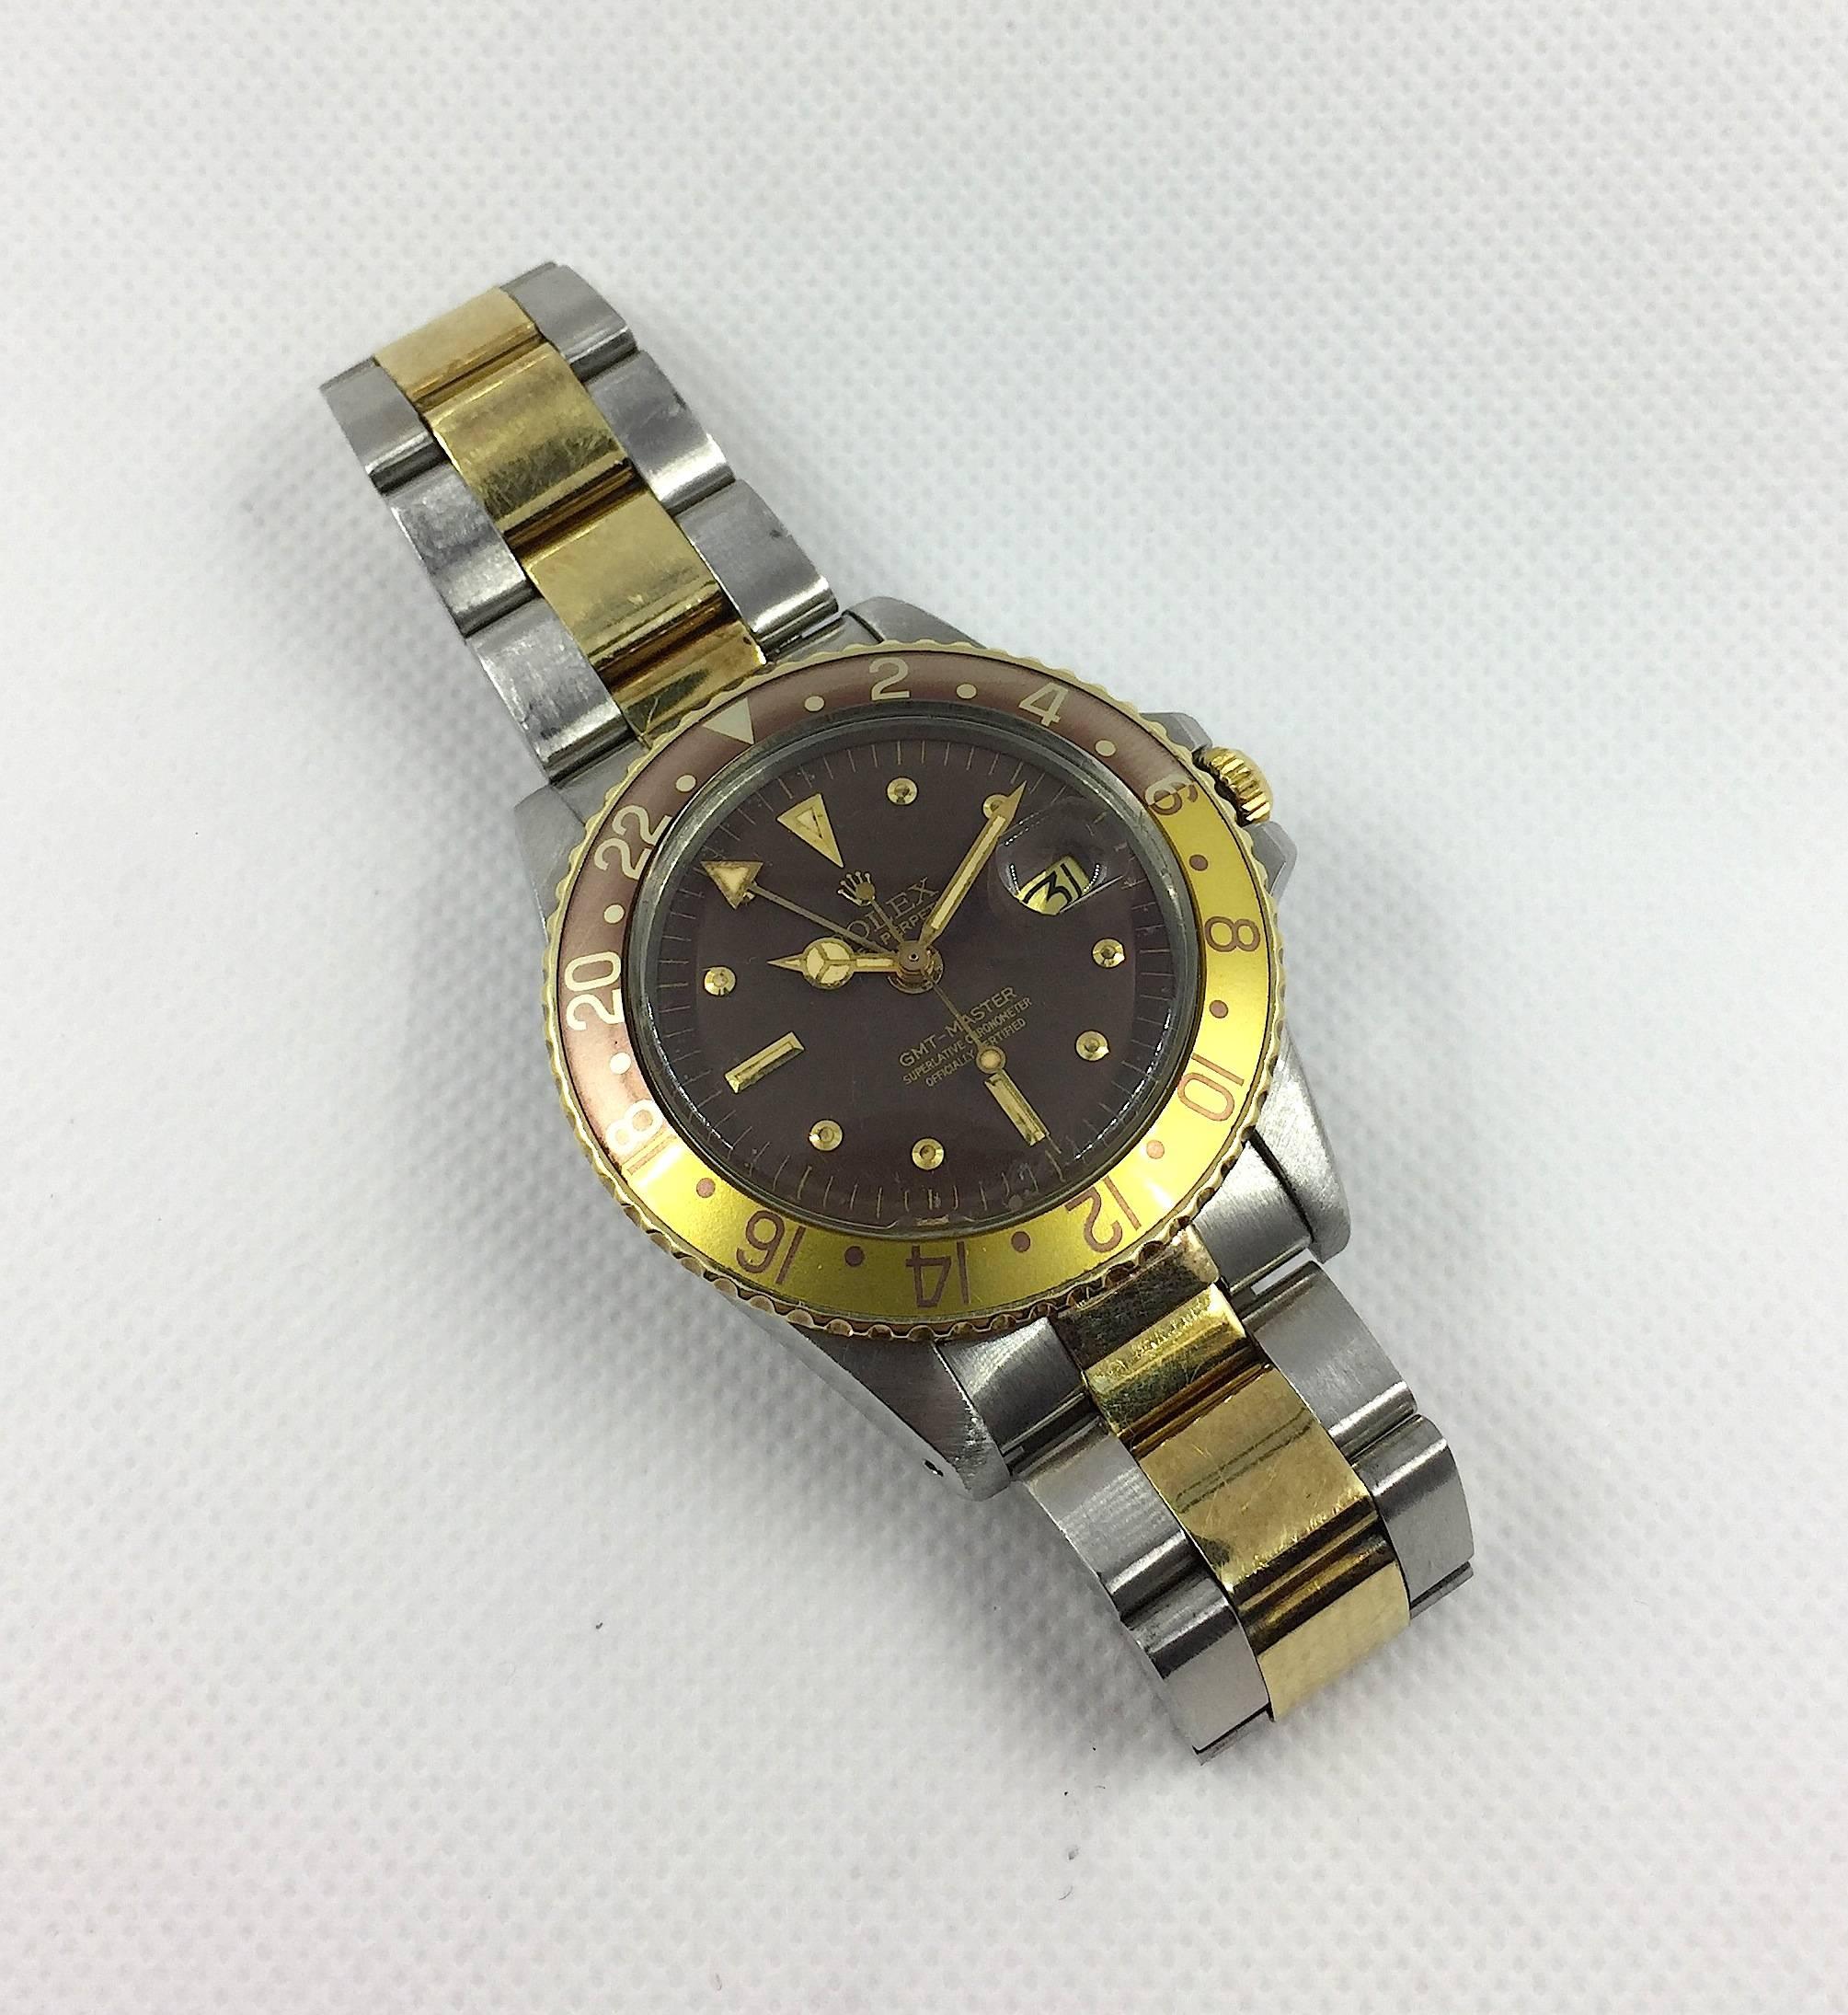 Rolex Oyster Perpetual GMT Master Wristwatch
Stainless Steel and 14K Yellow Gold
Factory Faded 'Rootbeer" Bezel insert
40mm in size 
Rolex  Calibre 1500 Base Automatic Movement
Acrylic Crystal
Quick-Set Date Function
From Mid 1970's
Watch and